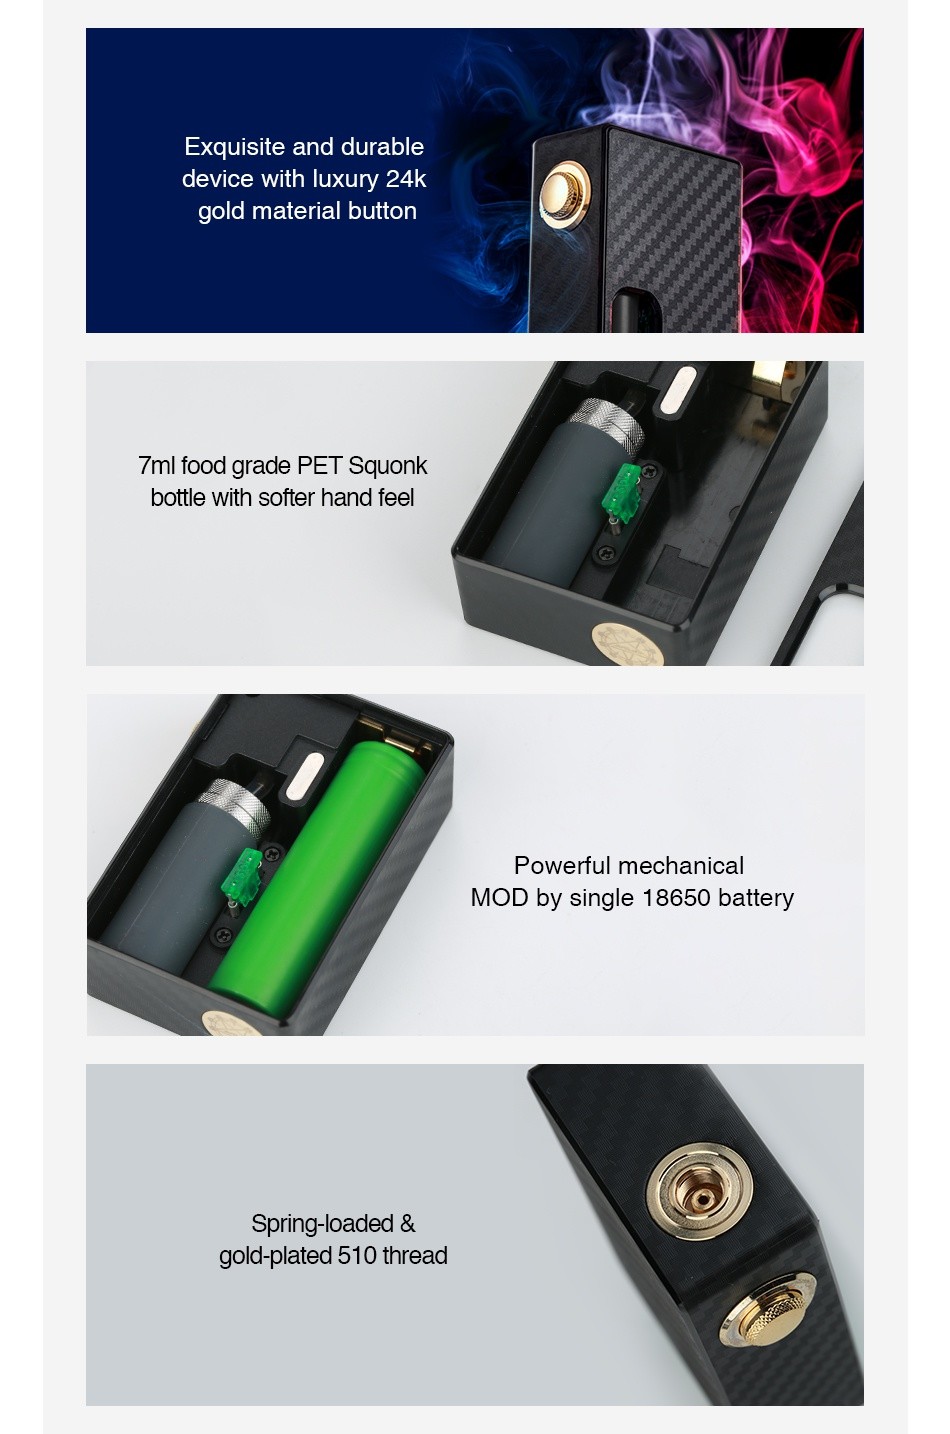 WOTOFO NUDGE Mechanical Squonk Box MOD Exquisite and durable device with luxury 24k gold material butt 7ml food grade PET Squonk ottle with softer hand feel Powerful mechanica MOd by single 18650 battery Spring loaded gold plated 510 thread